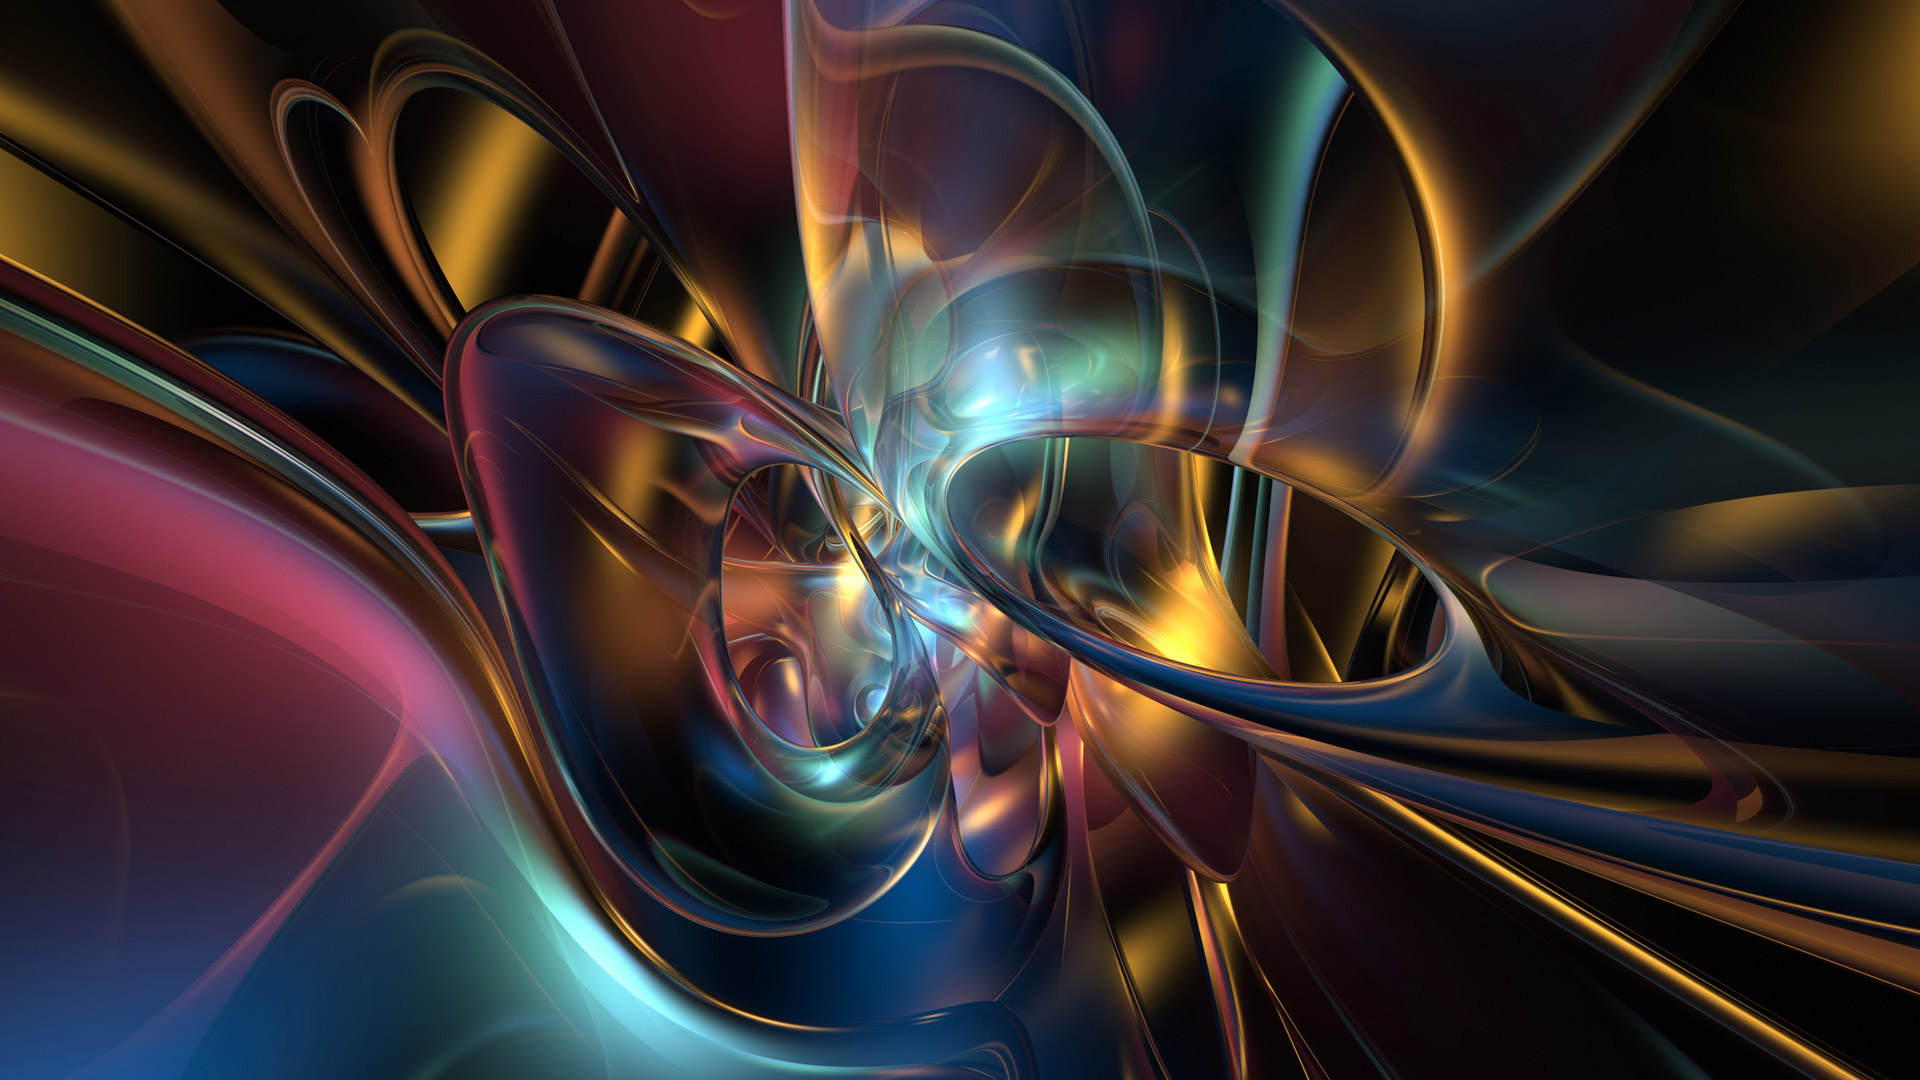 Abstract Design 1080p Wallpapers HD Wallpapers 1920x1080